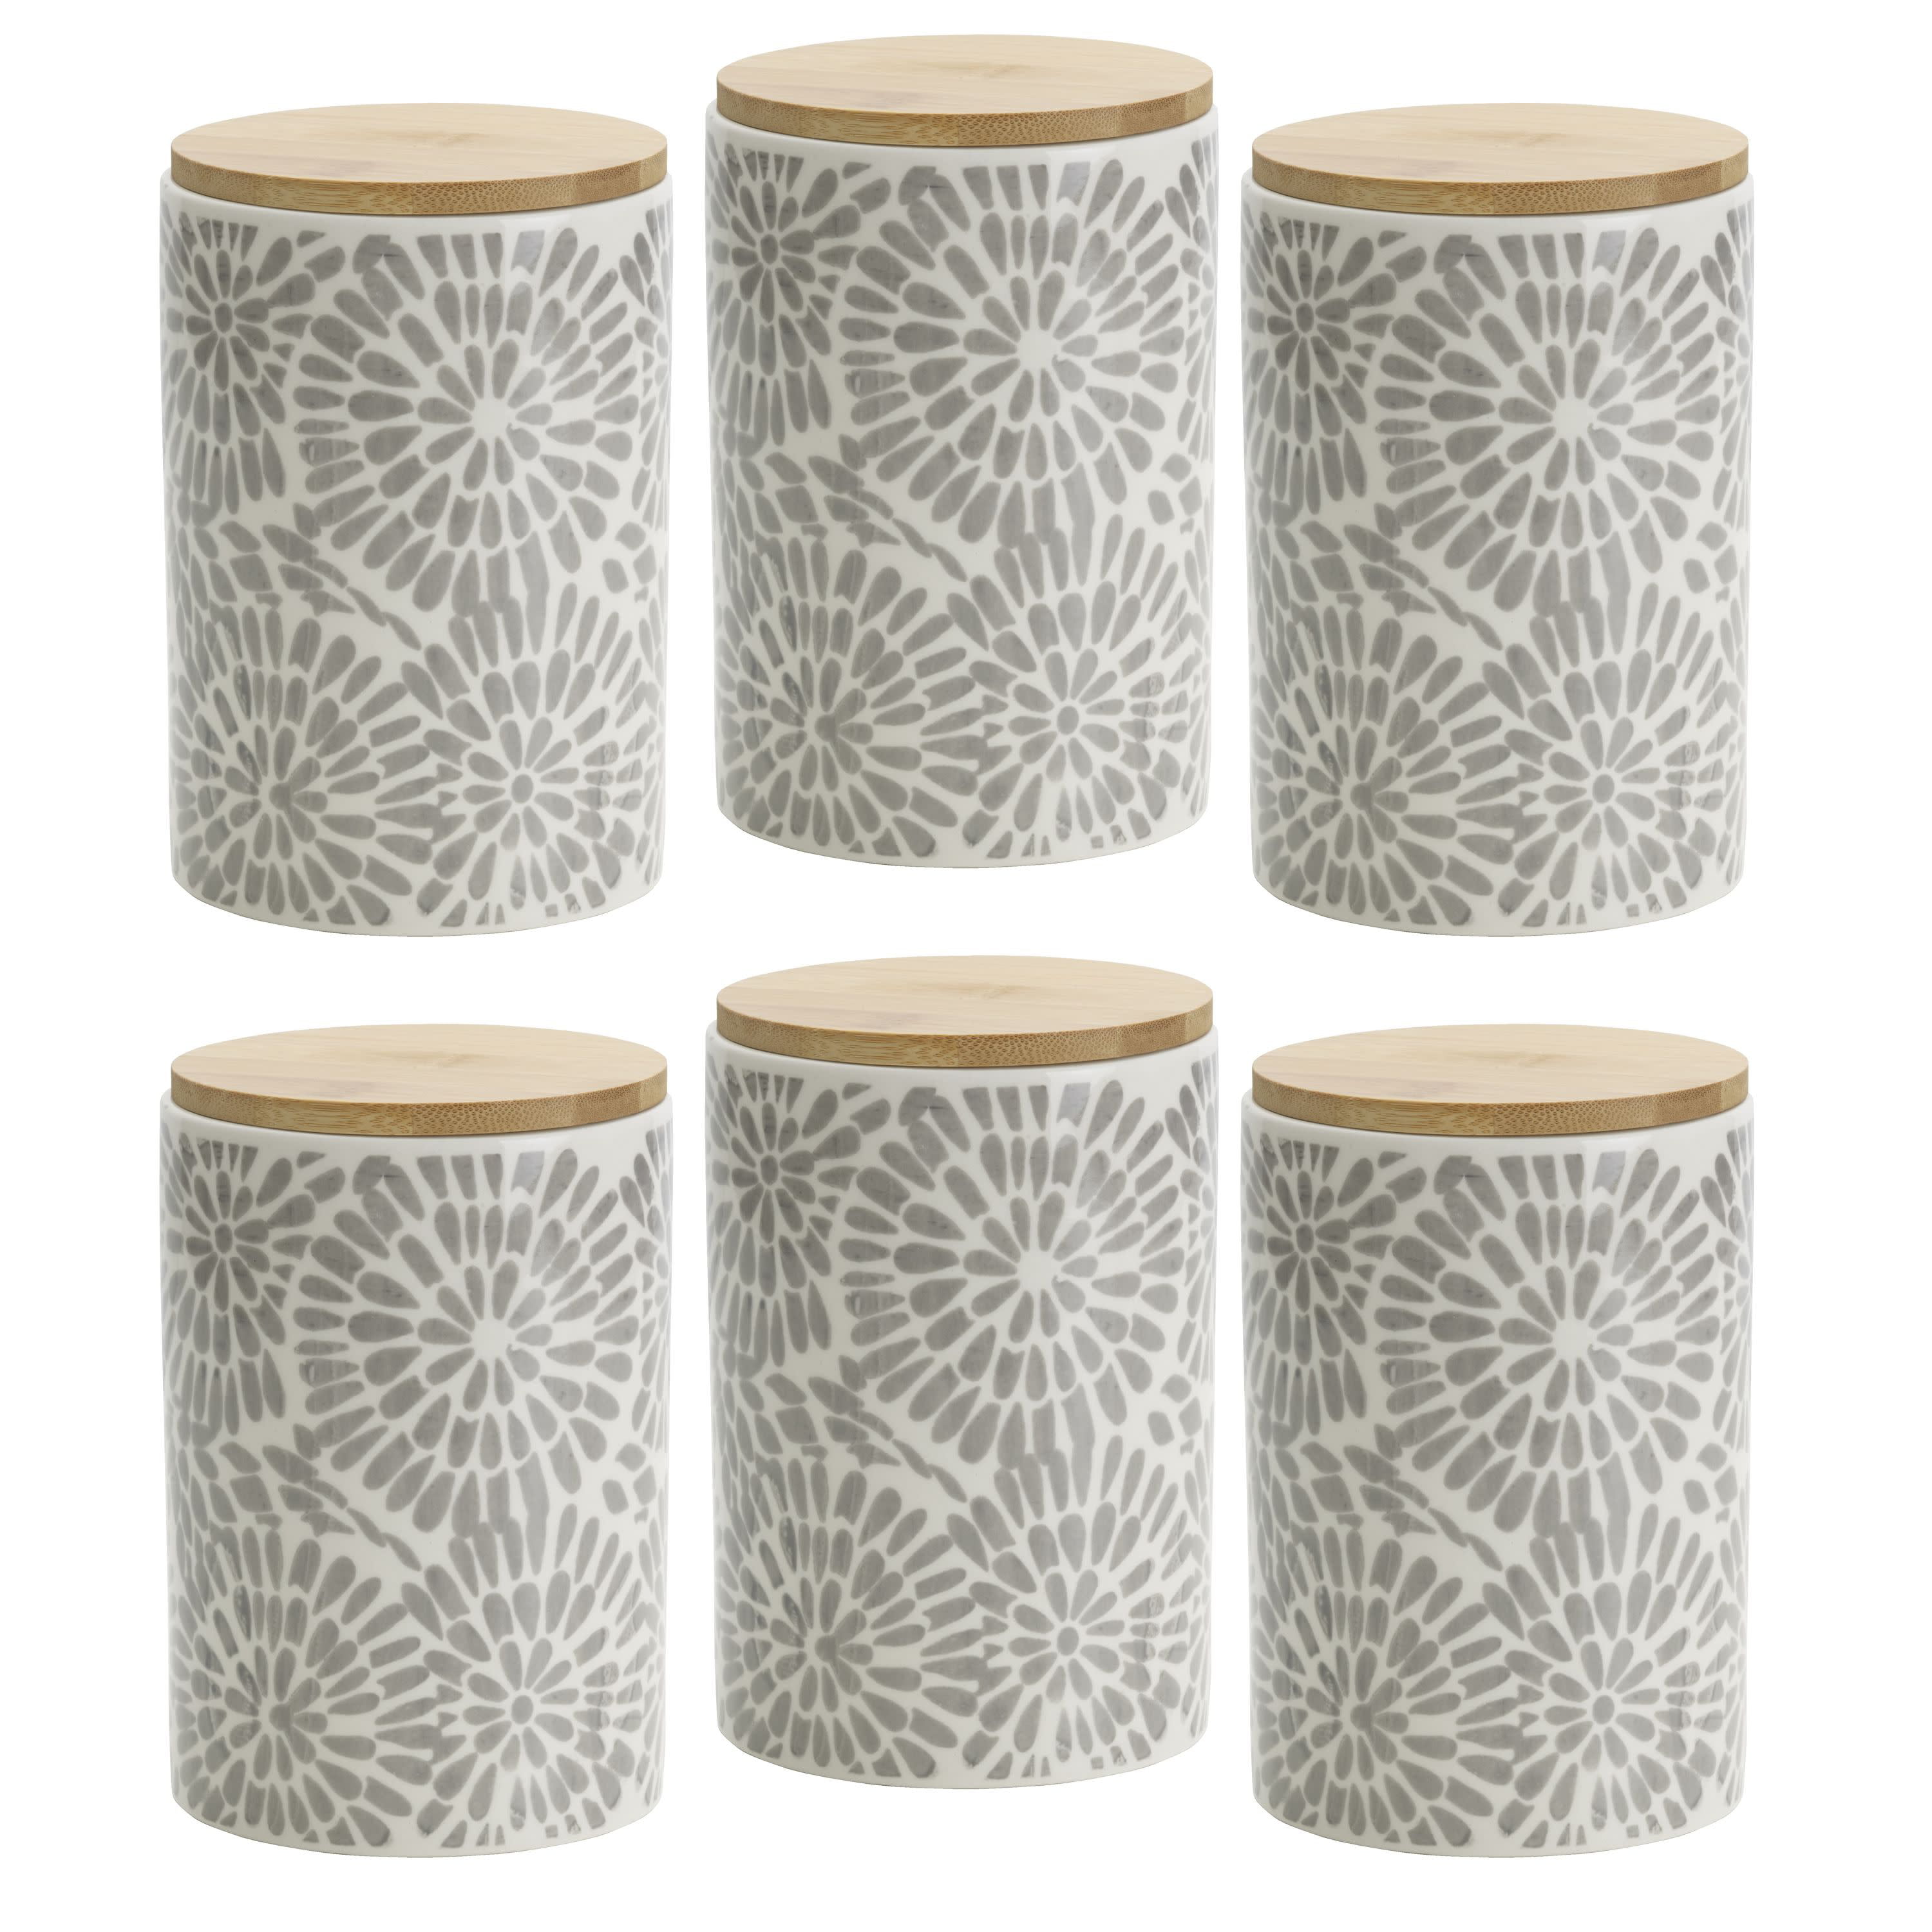 Pfaltzgraff Set of 6 6.5-inch White and Gray Floral Canisters with ...